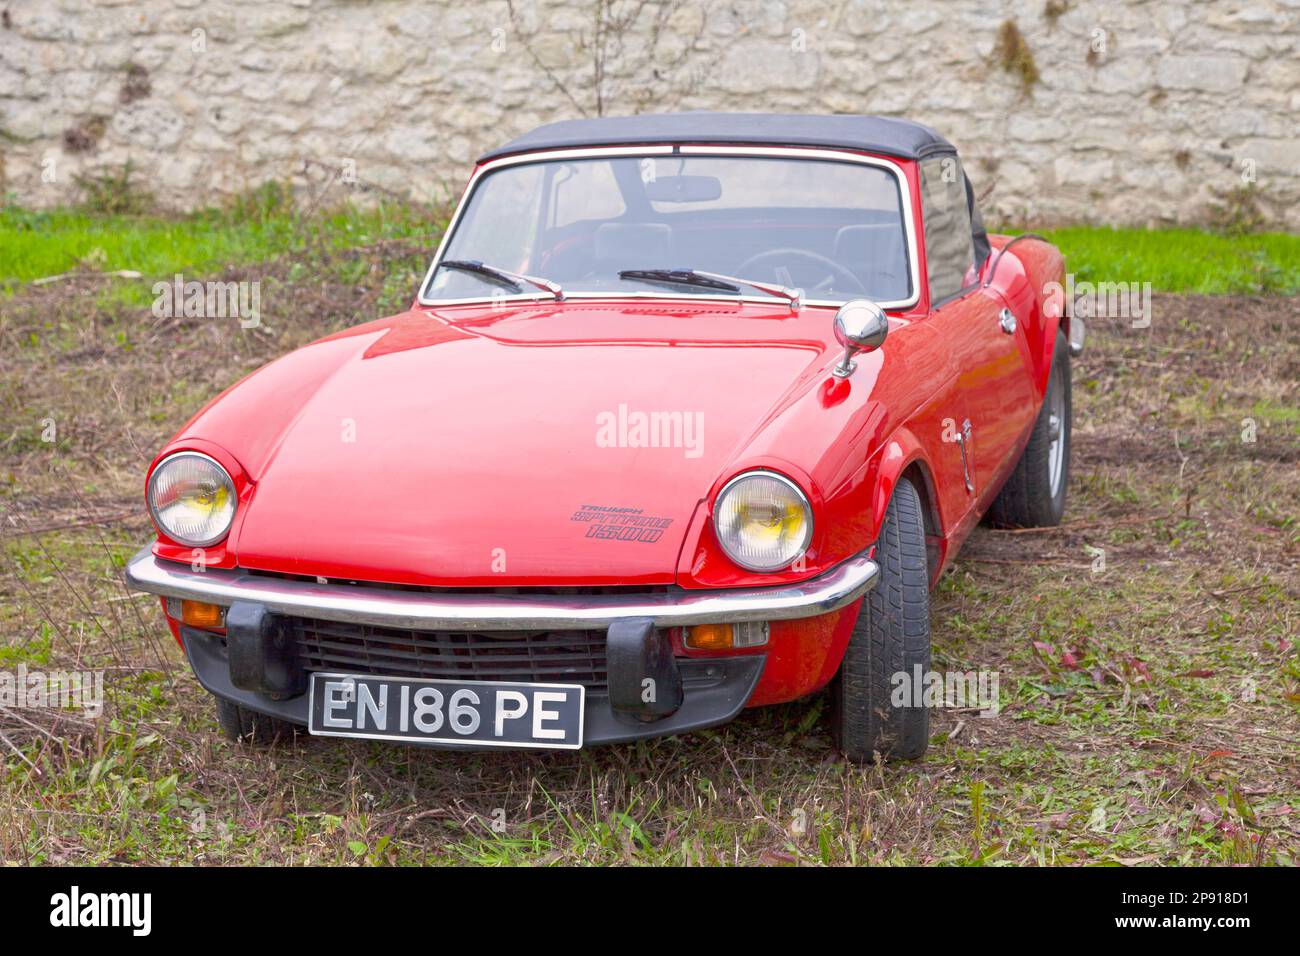 Luzarches, France - October 12 2019: The Triumph Spitfire is a small British two-seat sports car, introduced at the London Motor Show in 1962. The veh Stock Photo